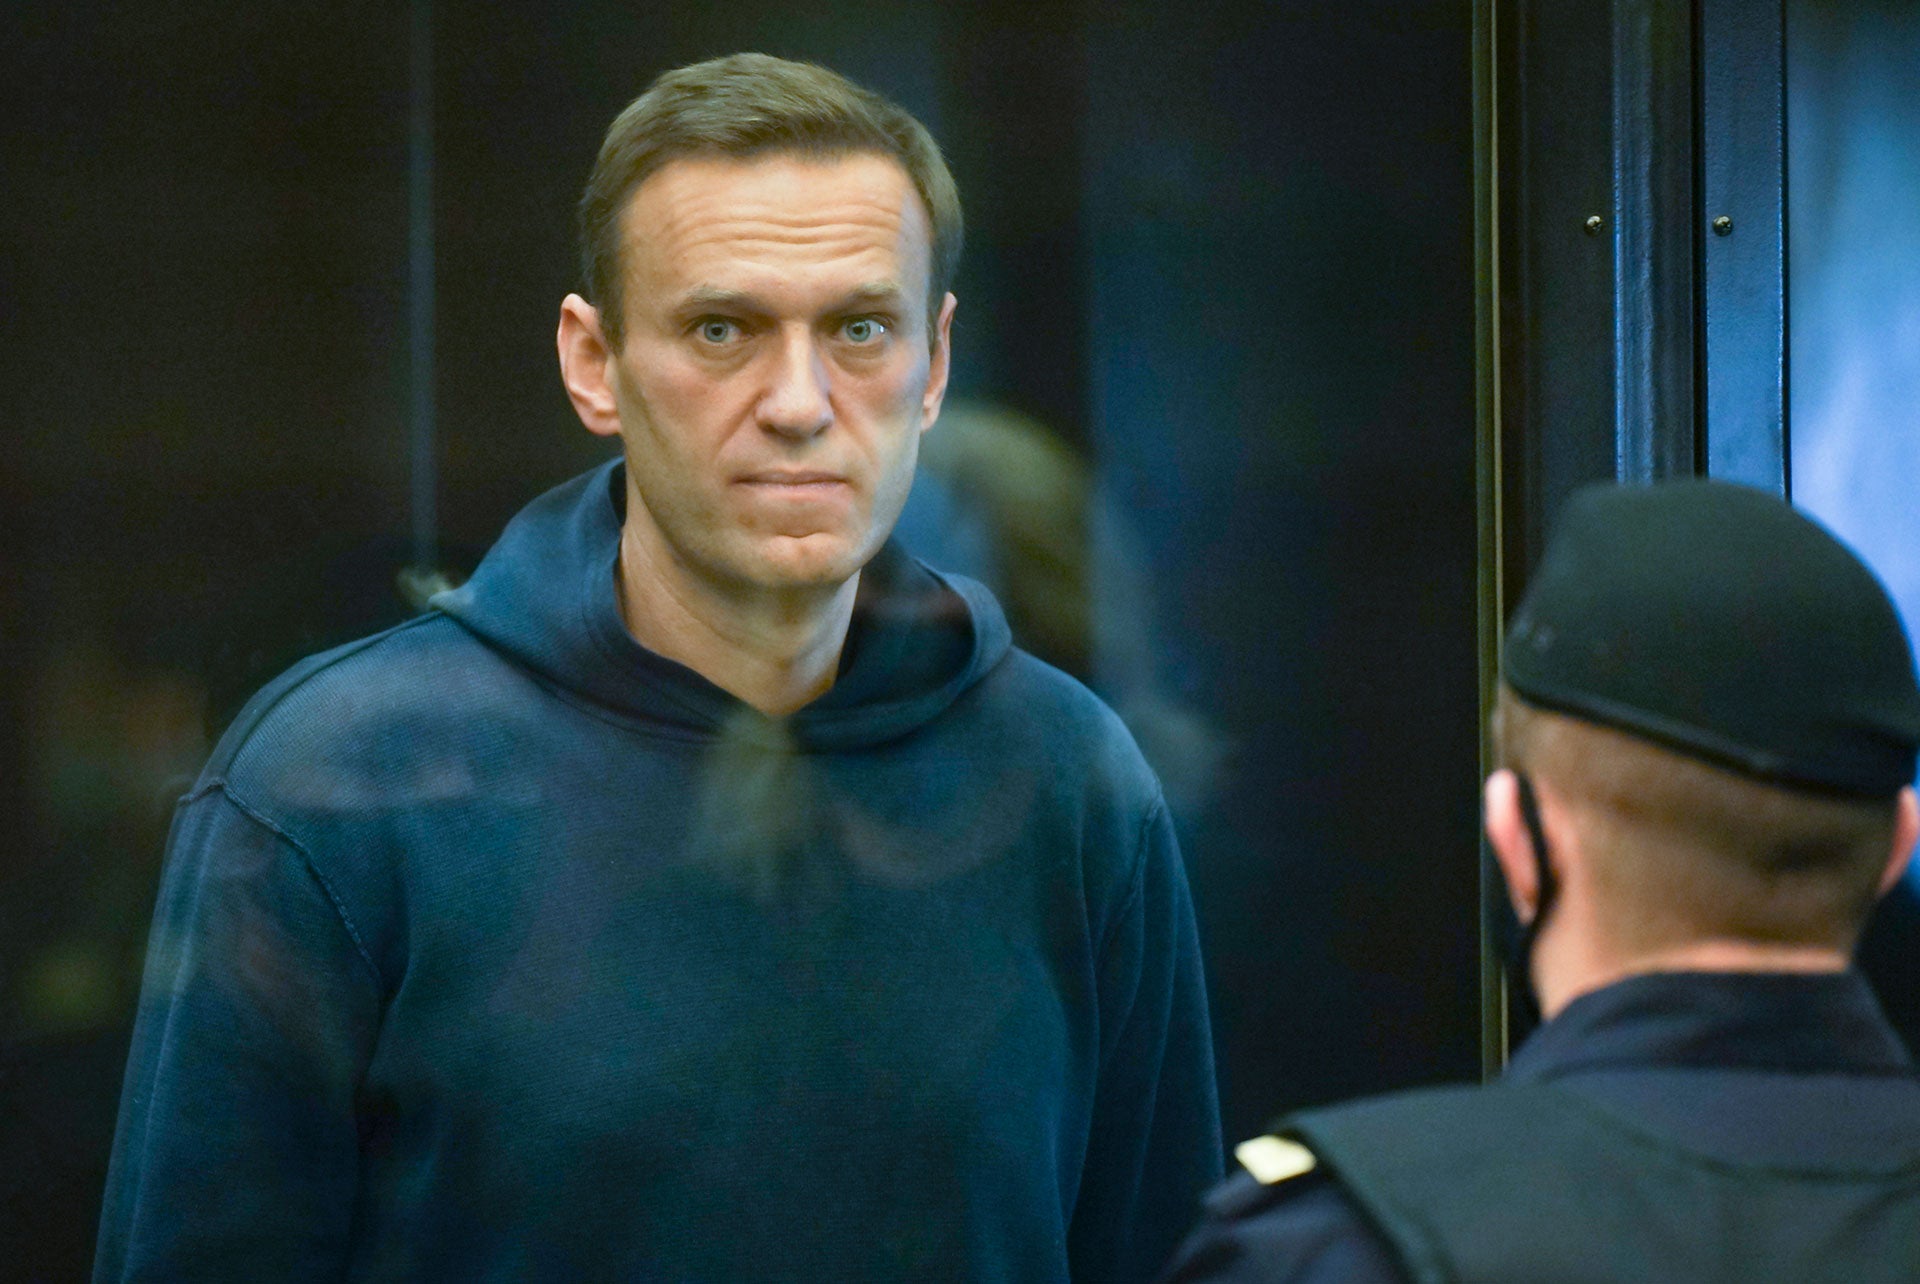 Russian opposition leader Alexei Navalny is pictured in the Moscow City Court in Moscow, Russia, February 2, 2021.